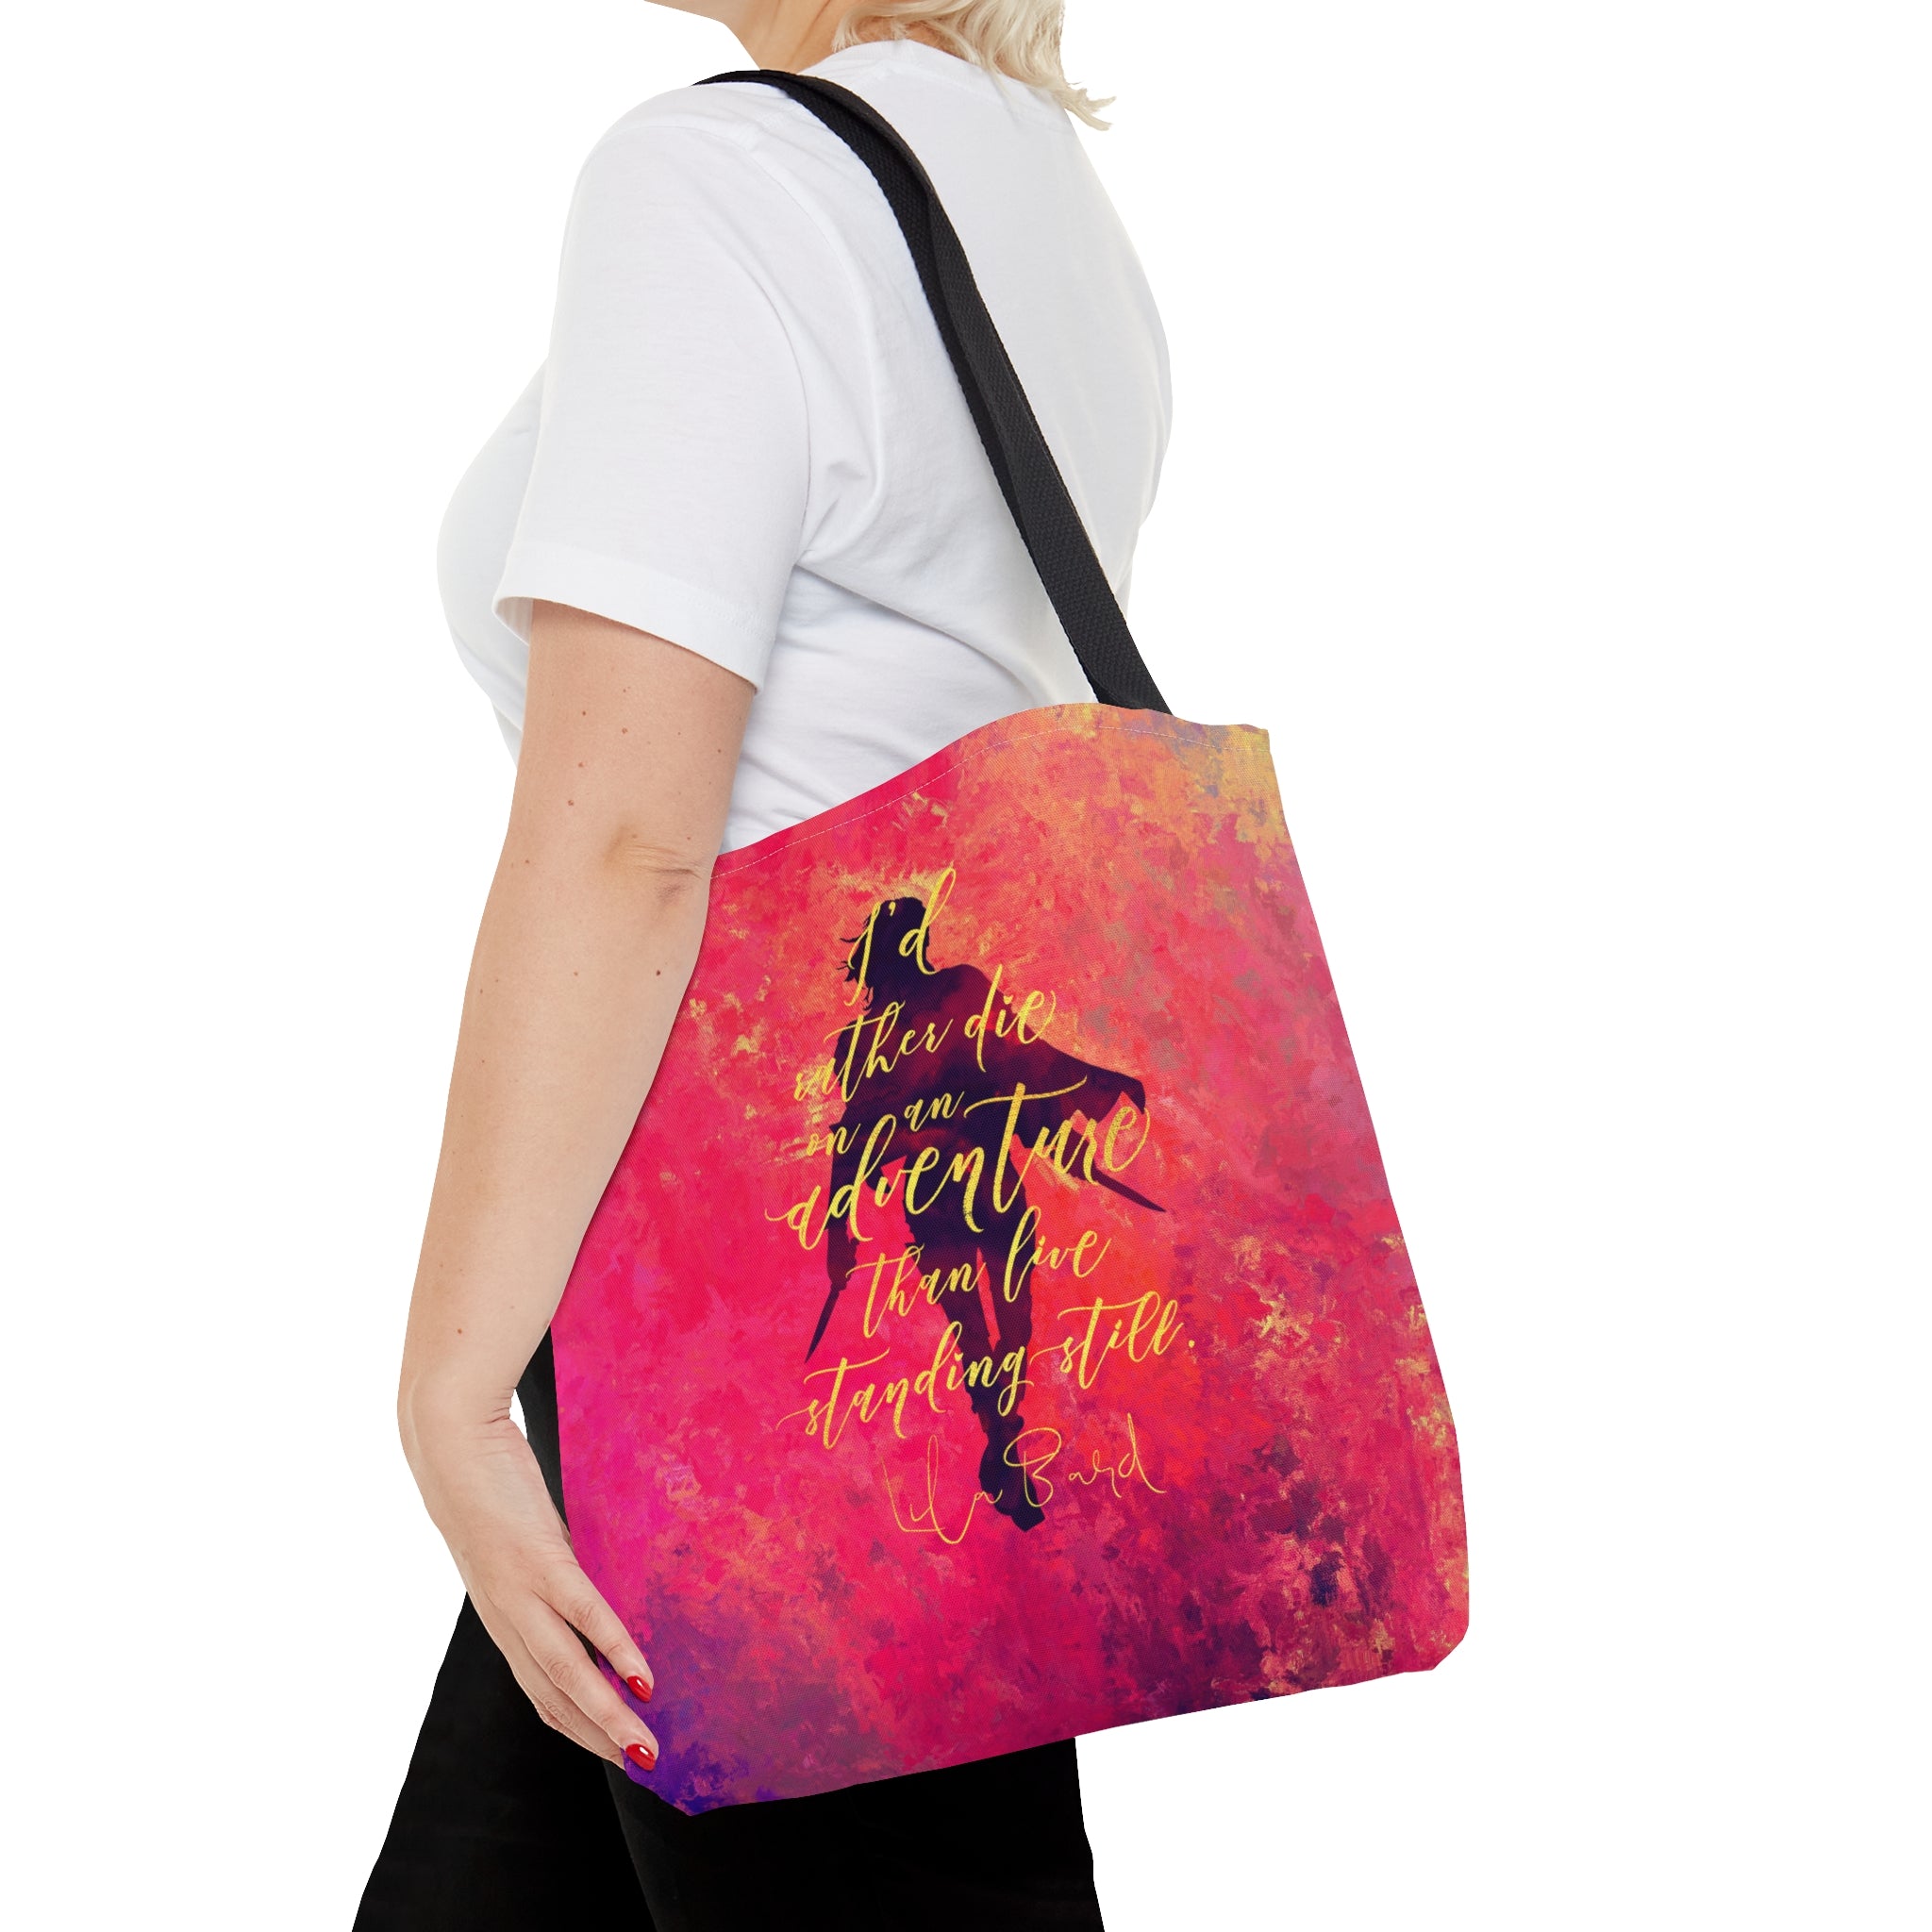 I'd rather die on an adventure... Lila Bard. ADSOM Tote Bag